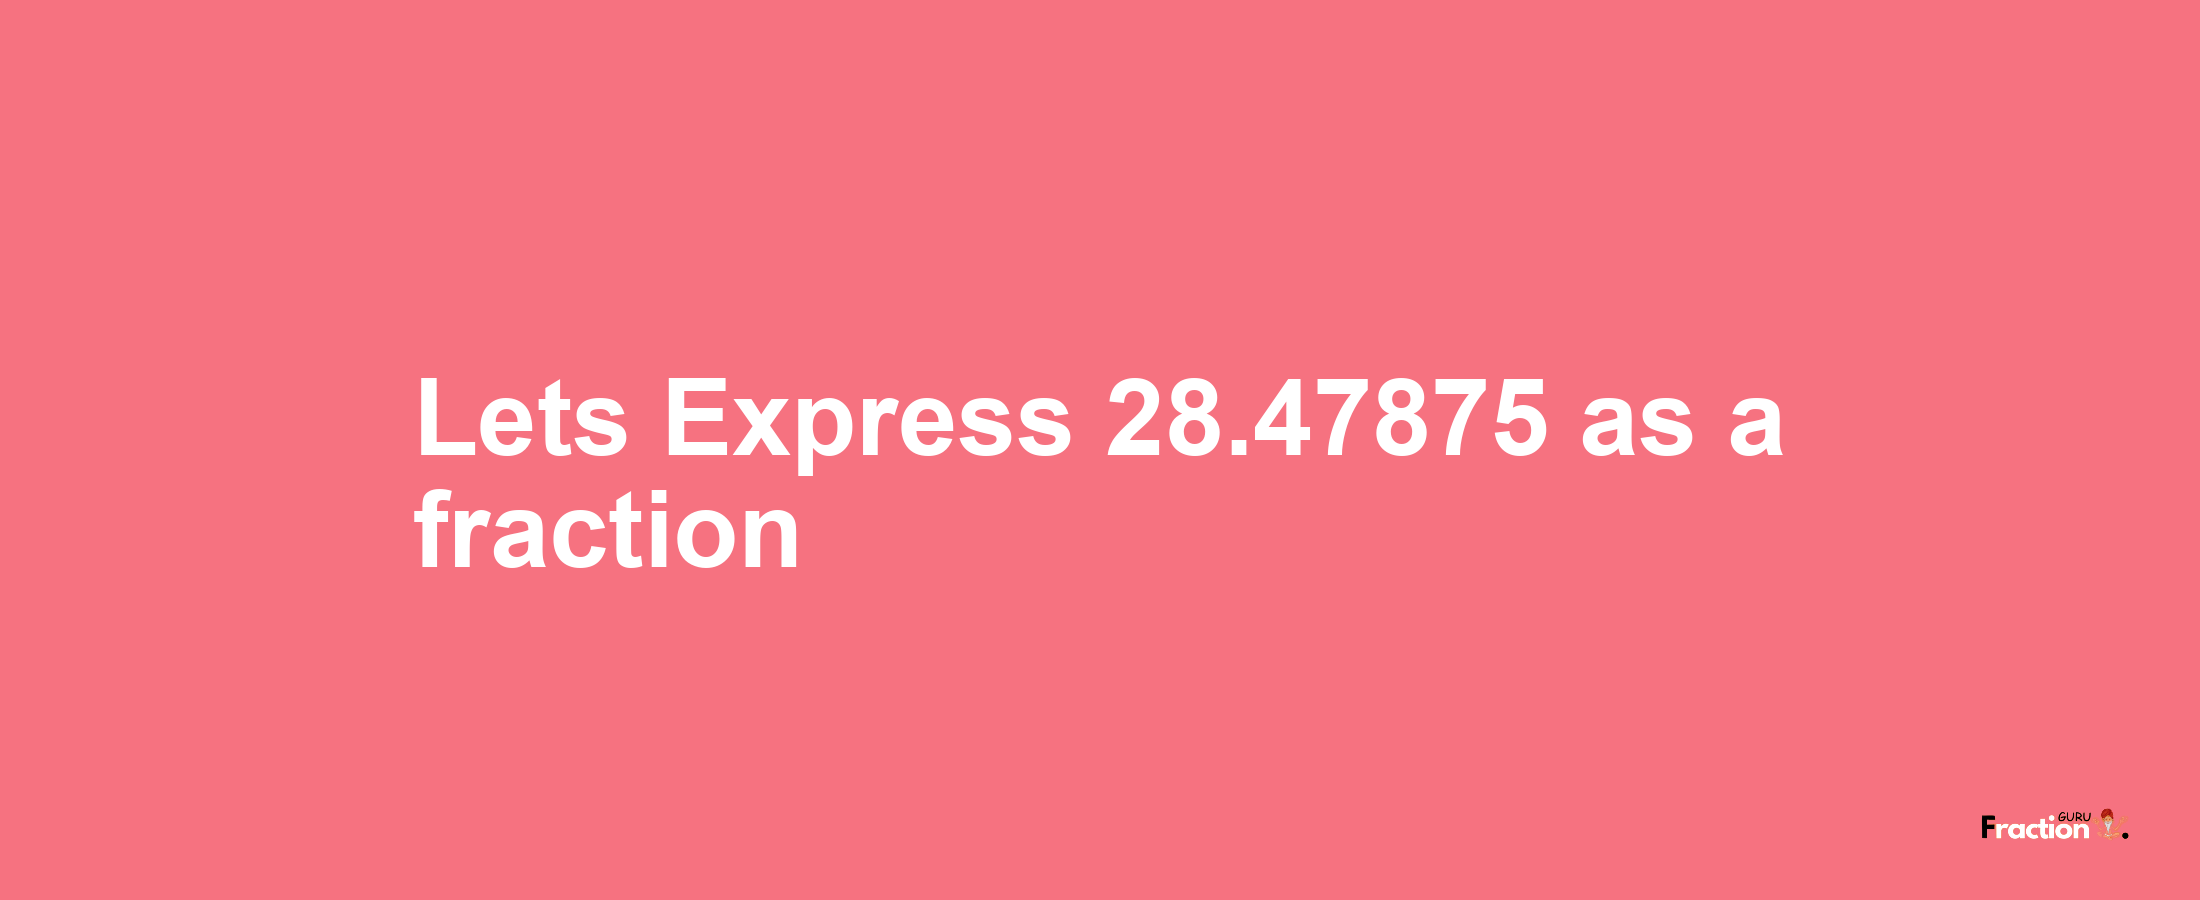 Lets Express 28.47875 as afraction